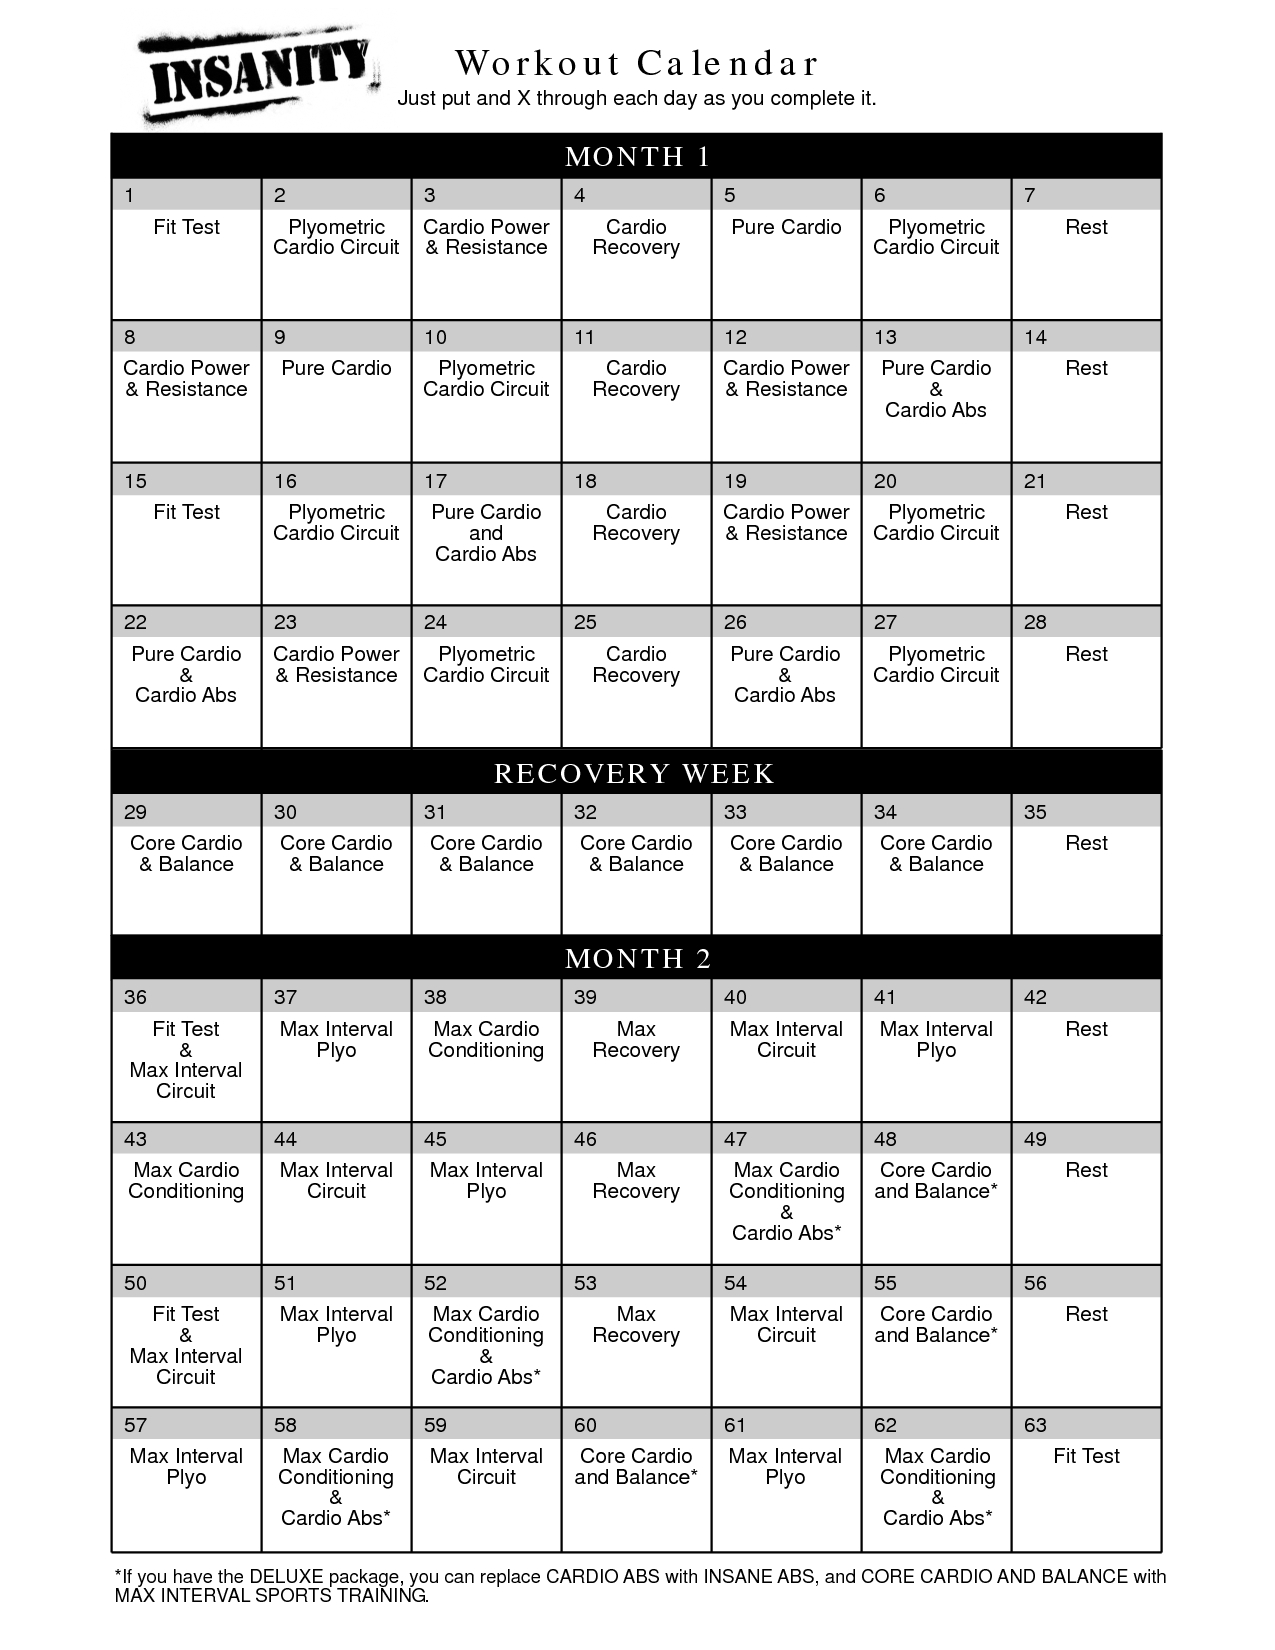 Zumba Fitness Incredible Slimdown Dvd System Weight Loss Exercise inside Shaun T Insane Abs Calendar Schedule